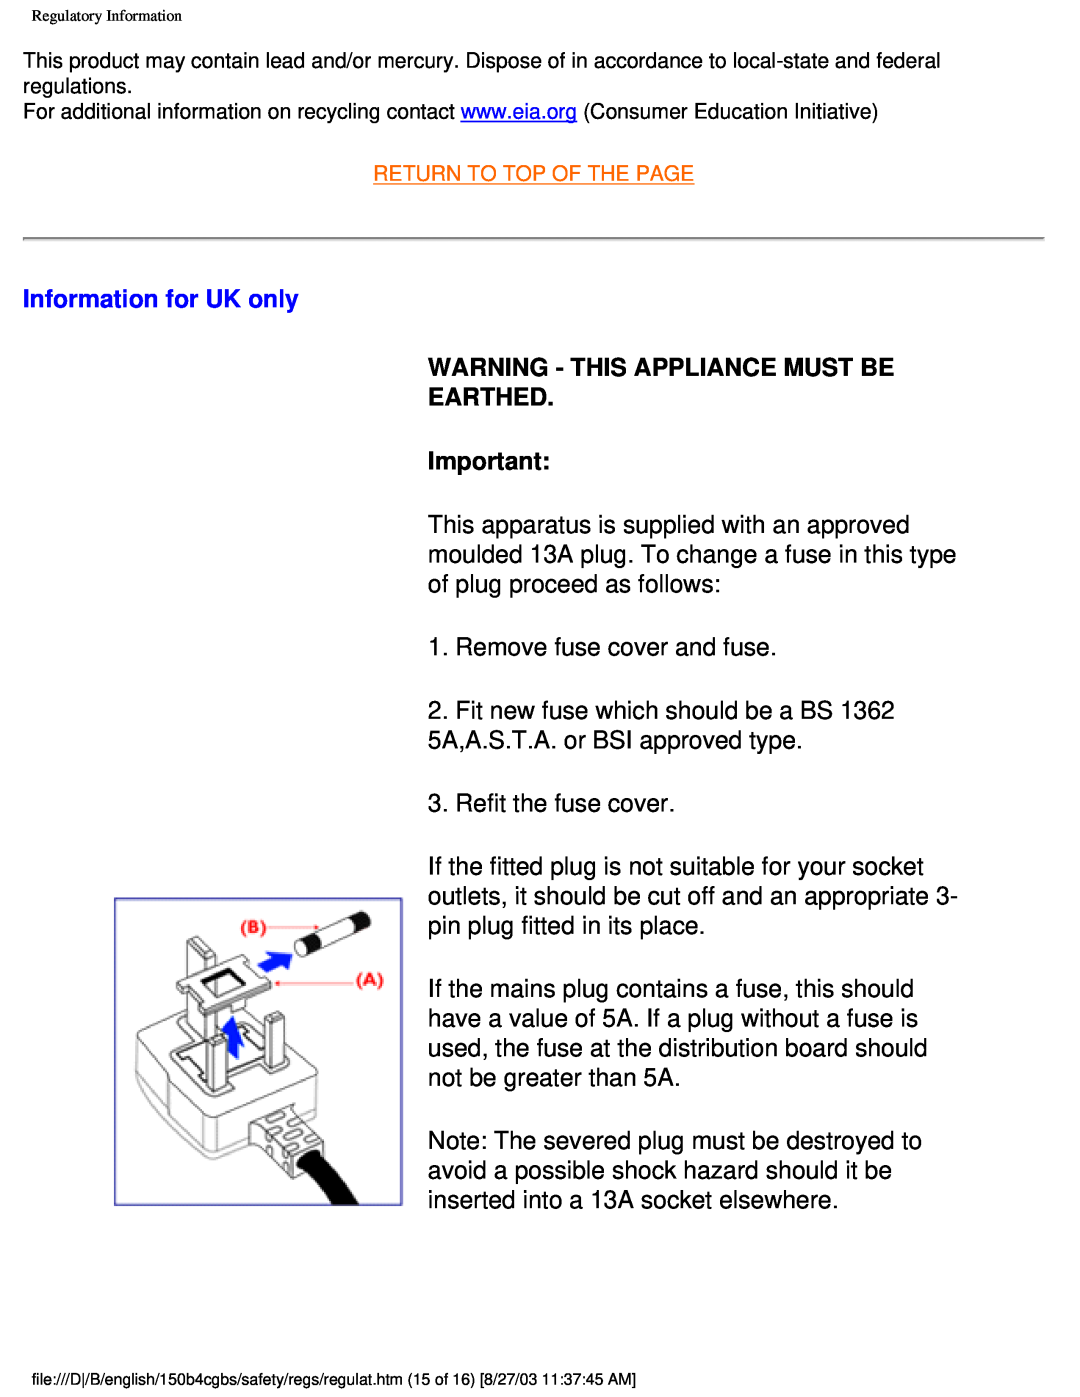 Philips 150B4CB, 150B4CG, 150B4CS user manual Information for UK only, Warning - This Appliance Must Be Earthed 